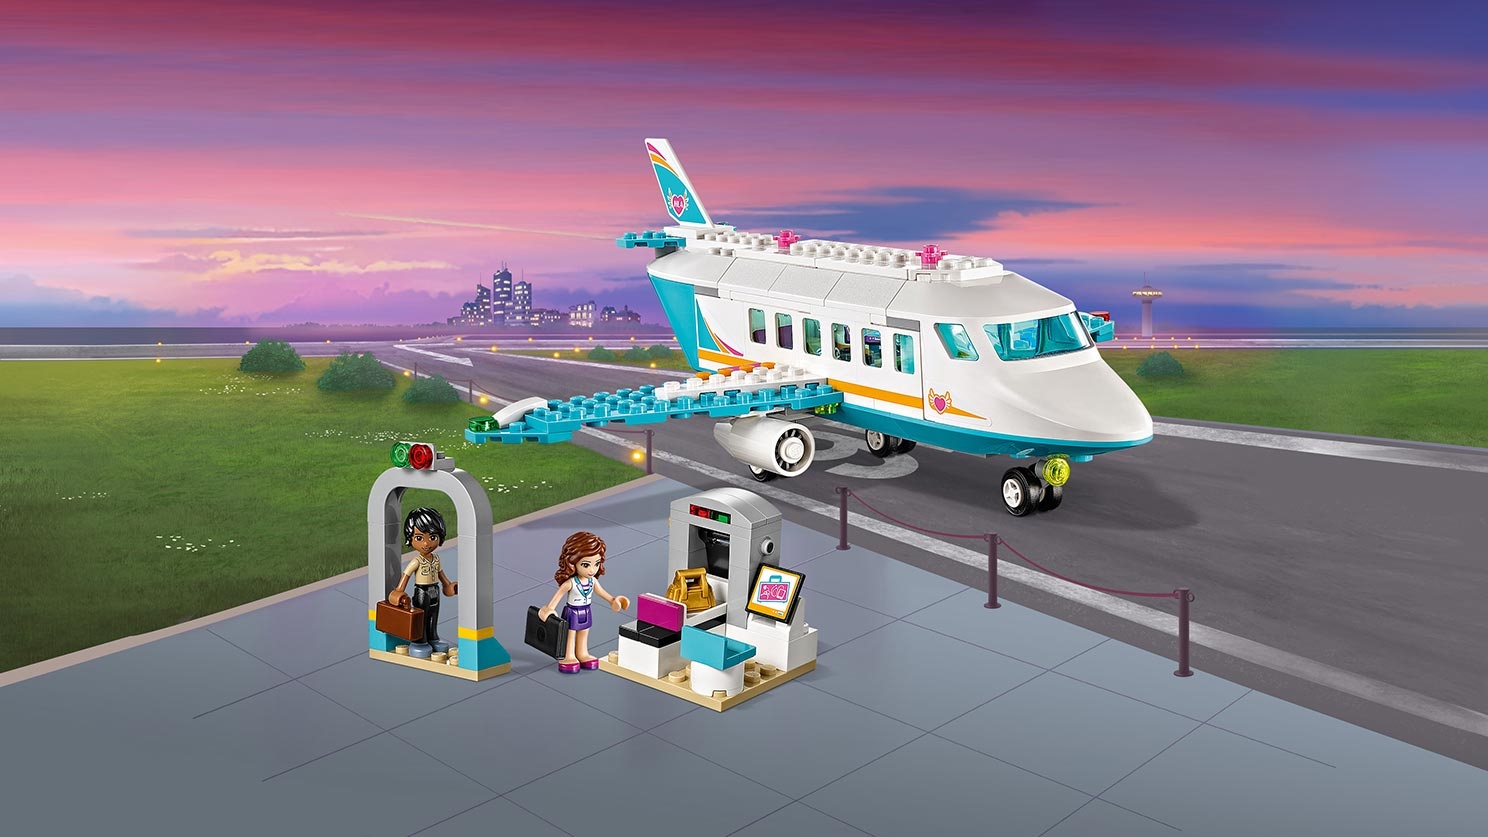 Heartlake Private Jet 41100 - LEGO® Friends Sets - LEGO.com for kids Can You Bring Legos On A Plane